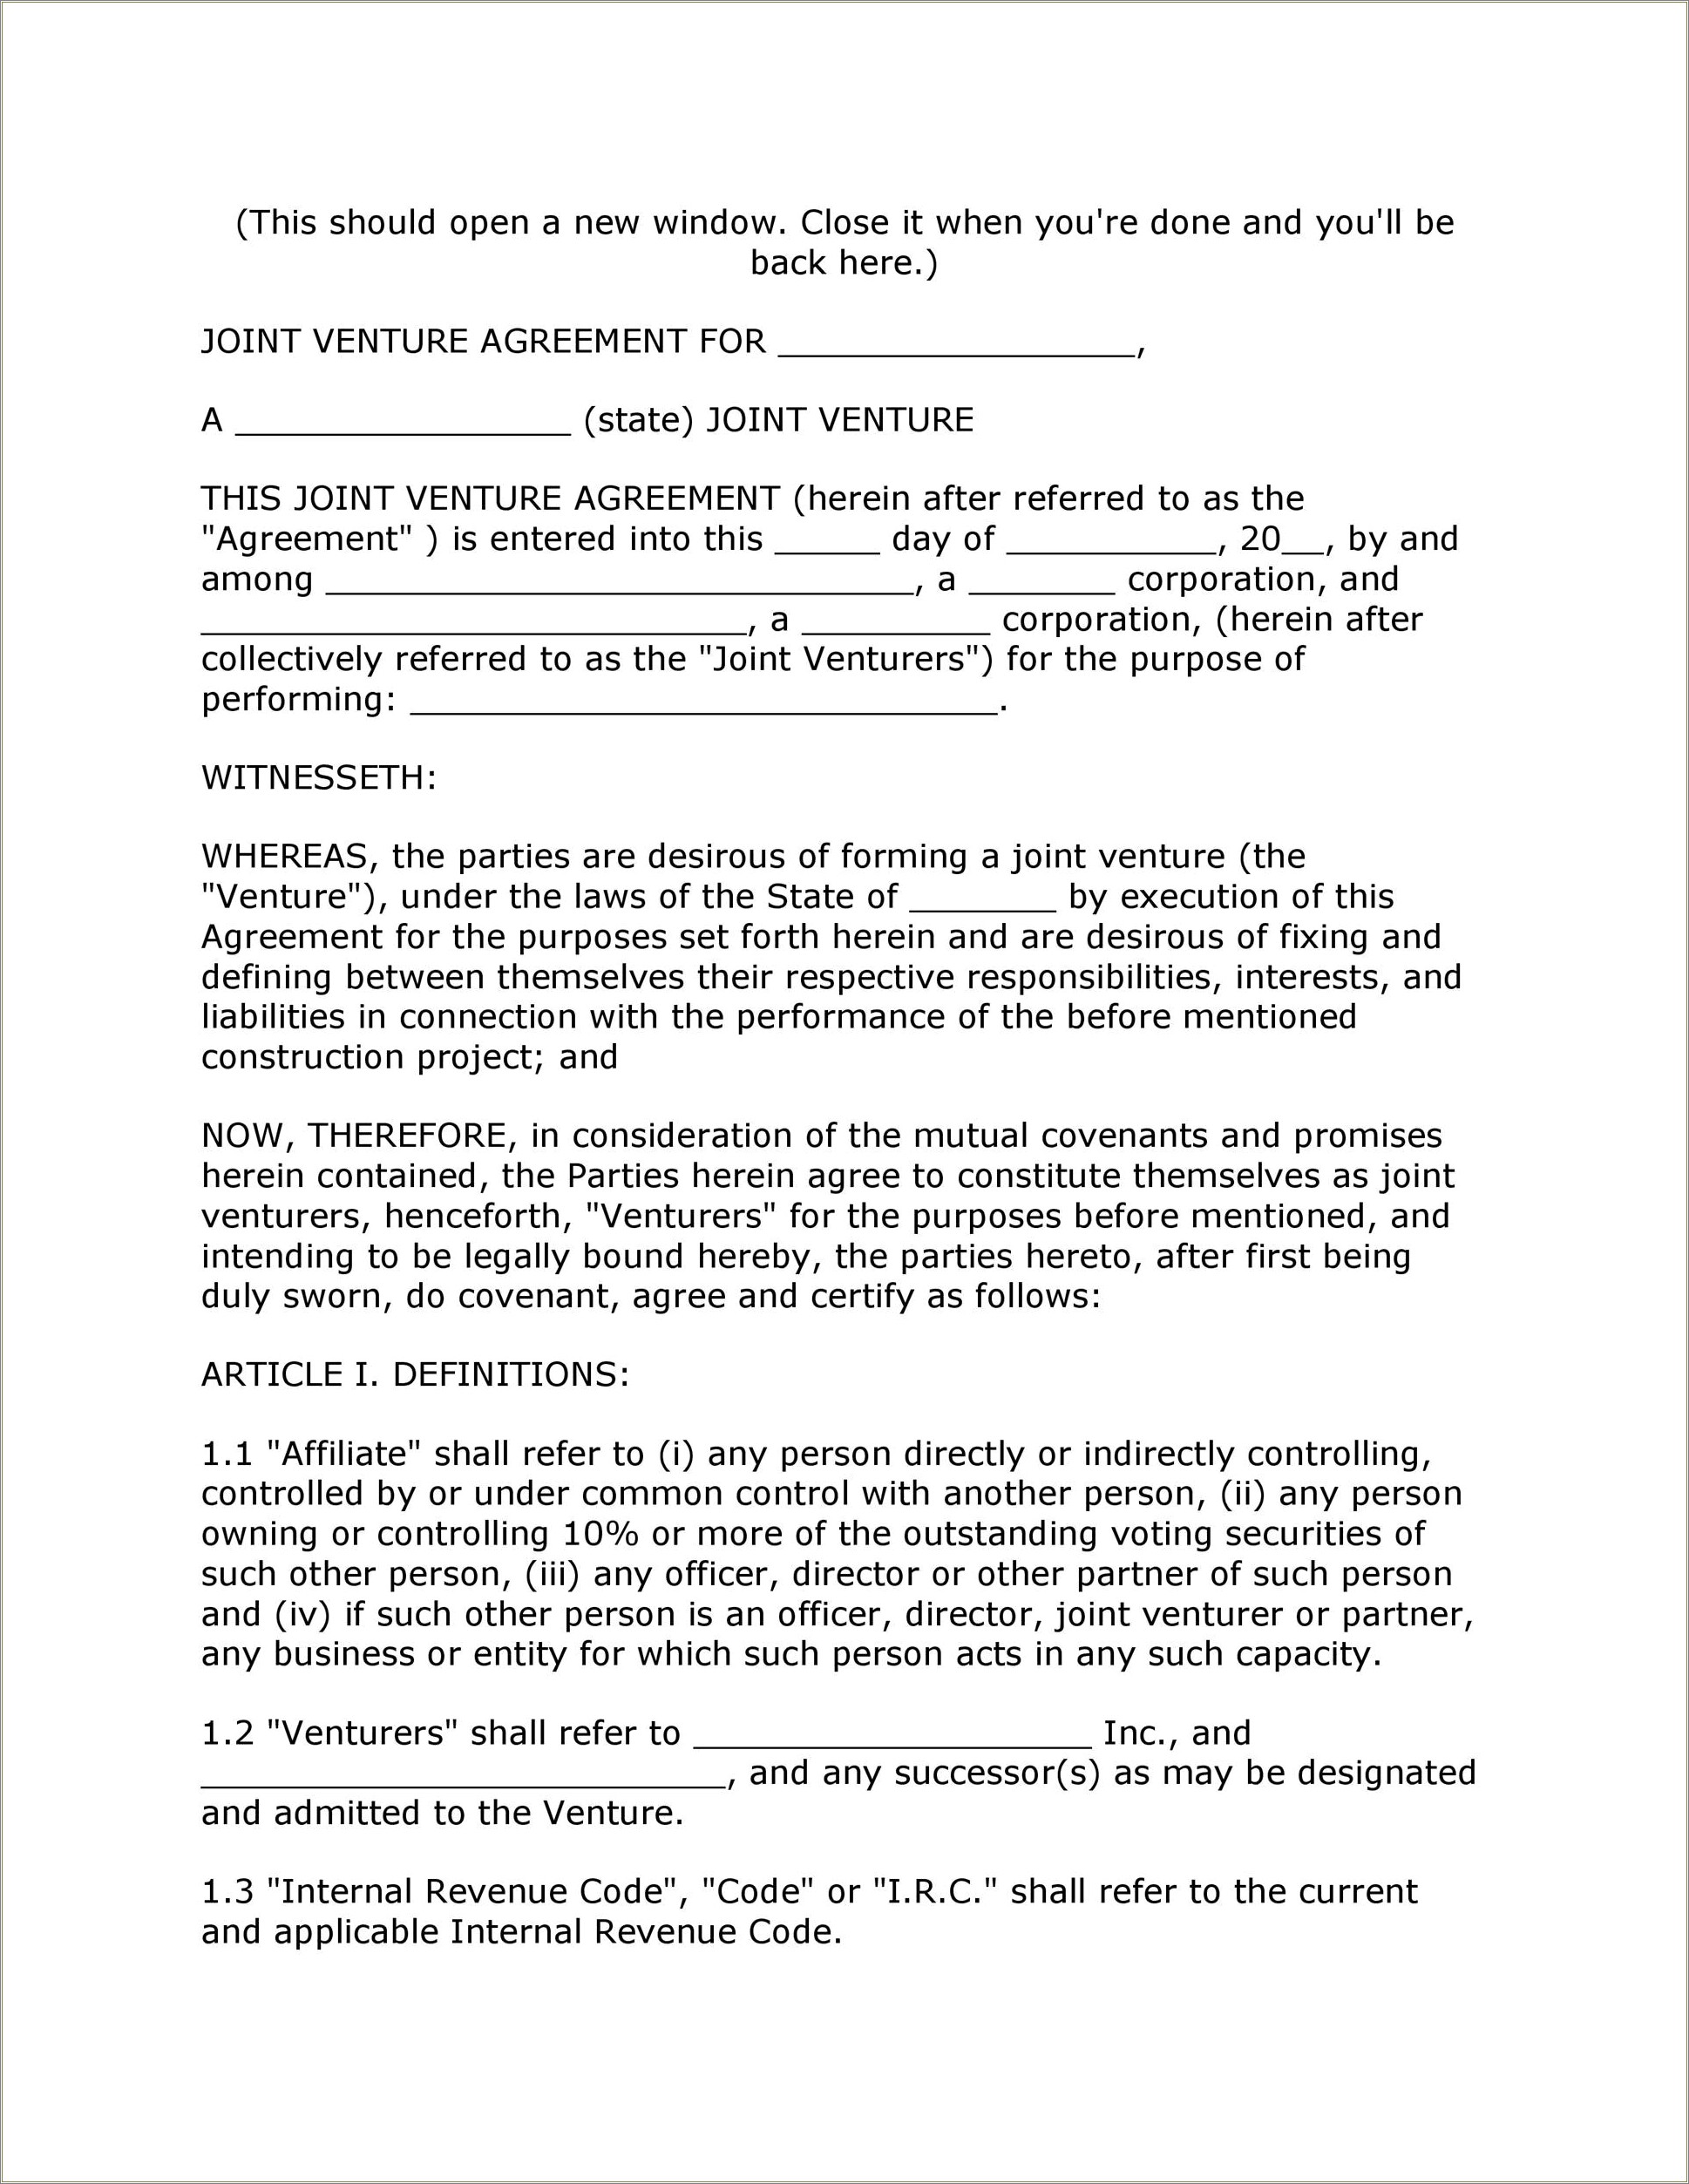 Basic Partnership Agreement Template Free South Africa